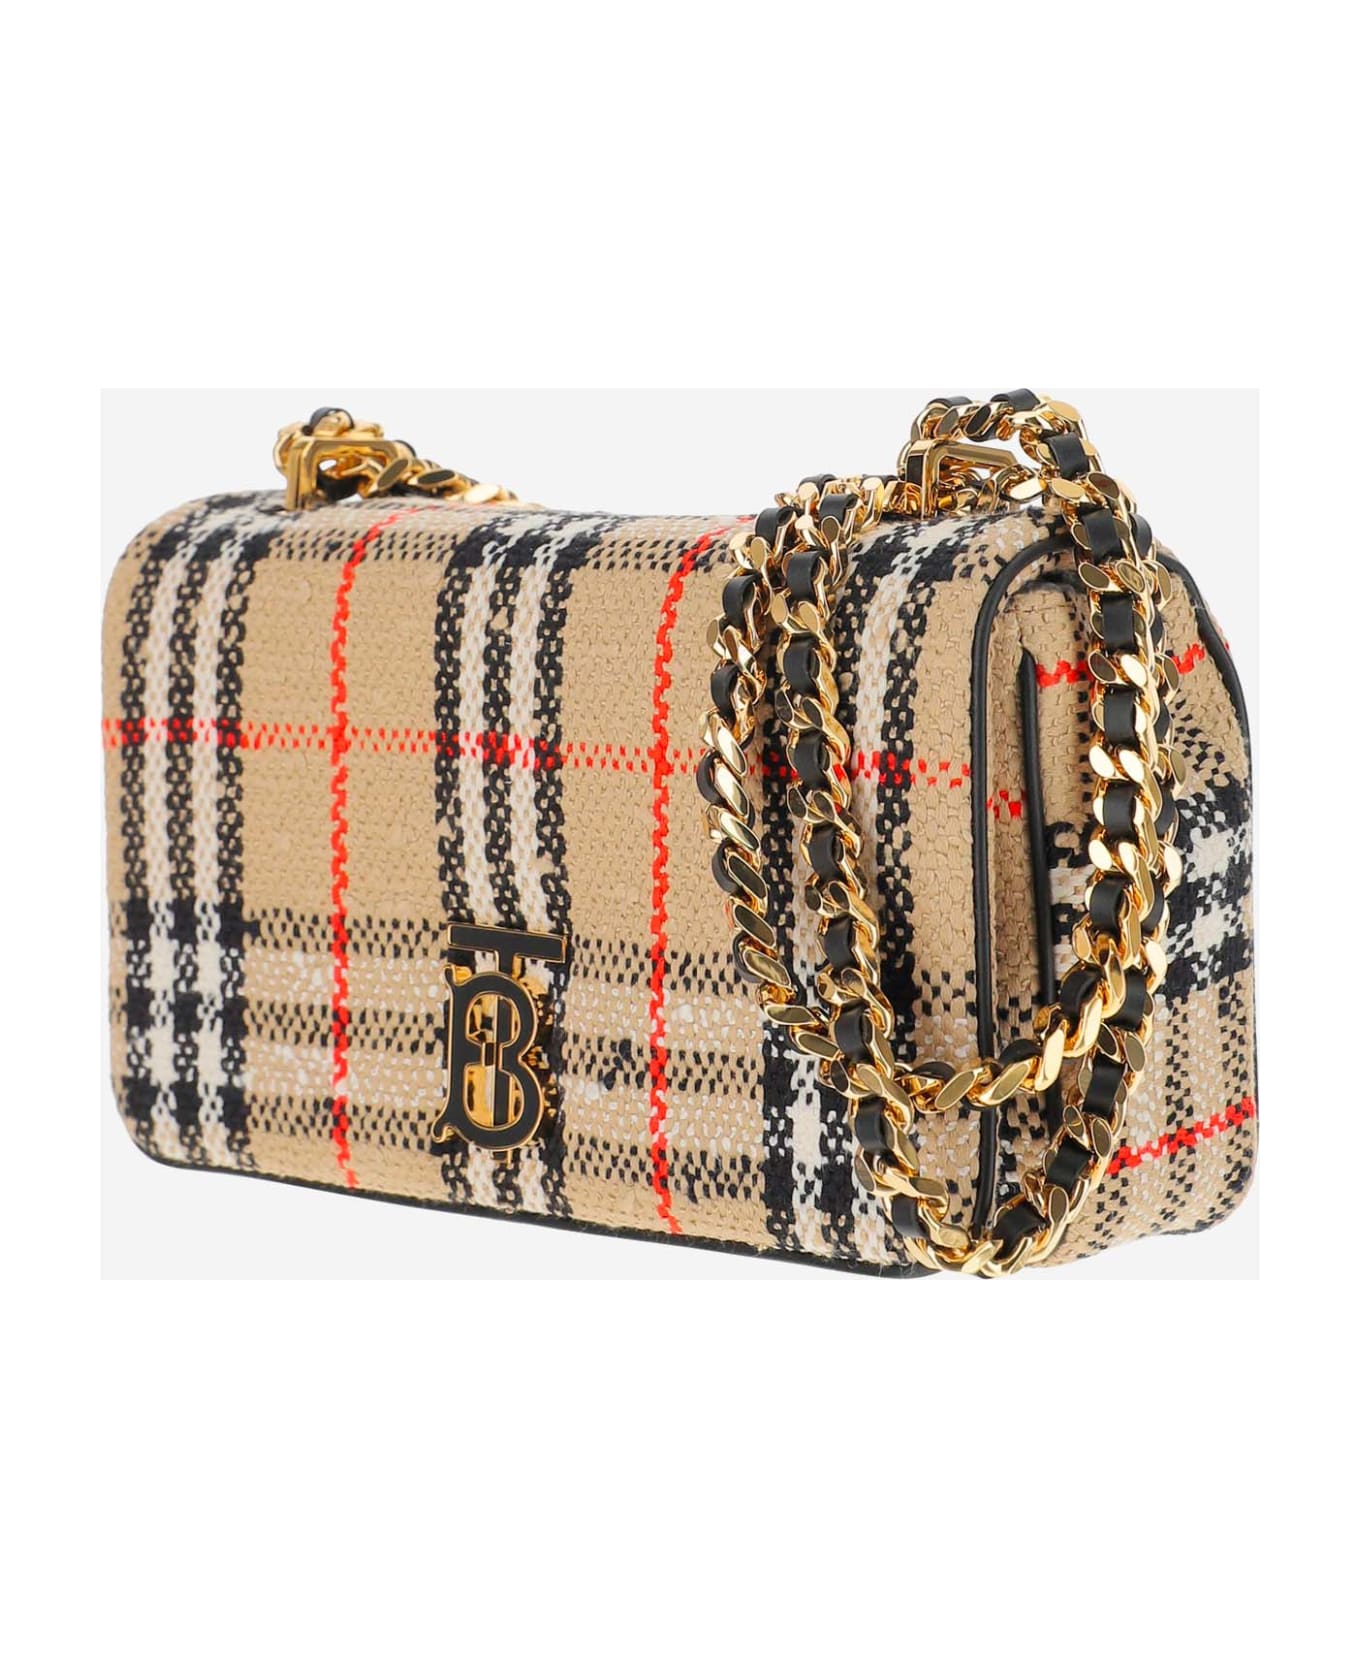 Burberry Lola Small Bouclé Bag With Vintage Check Pattern - Beige ショルダーバッグ